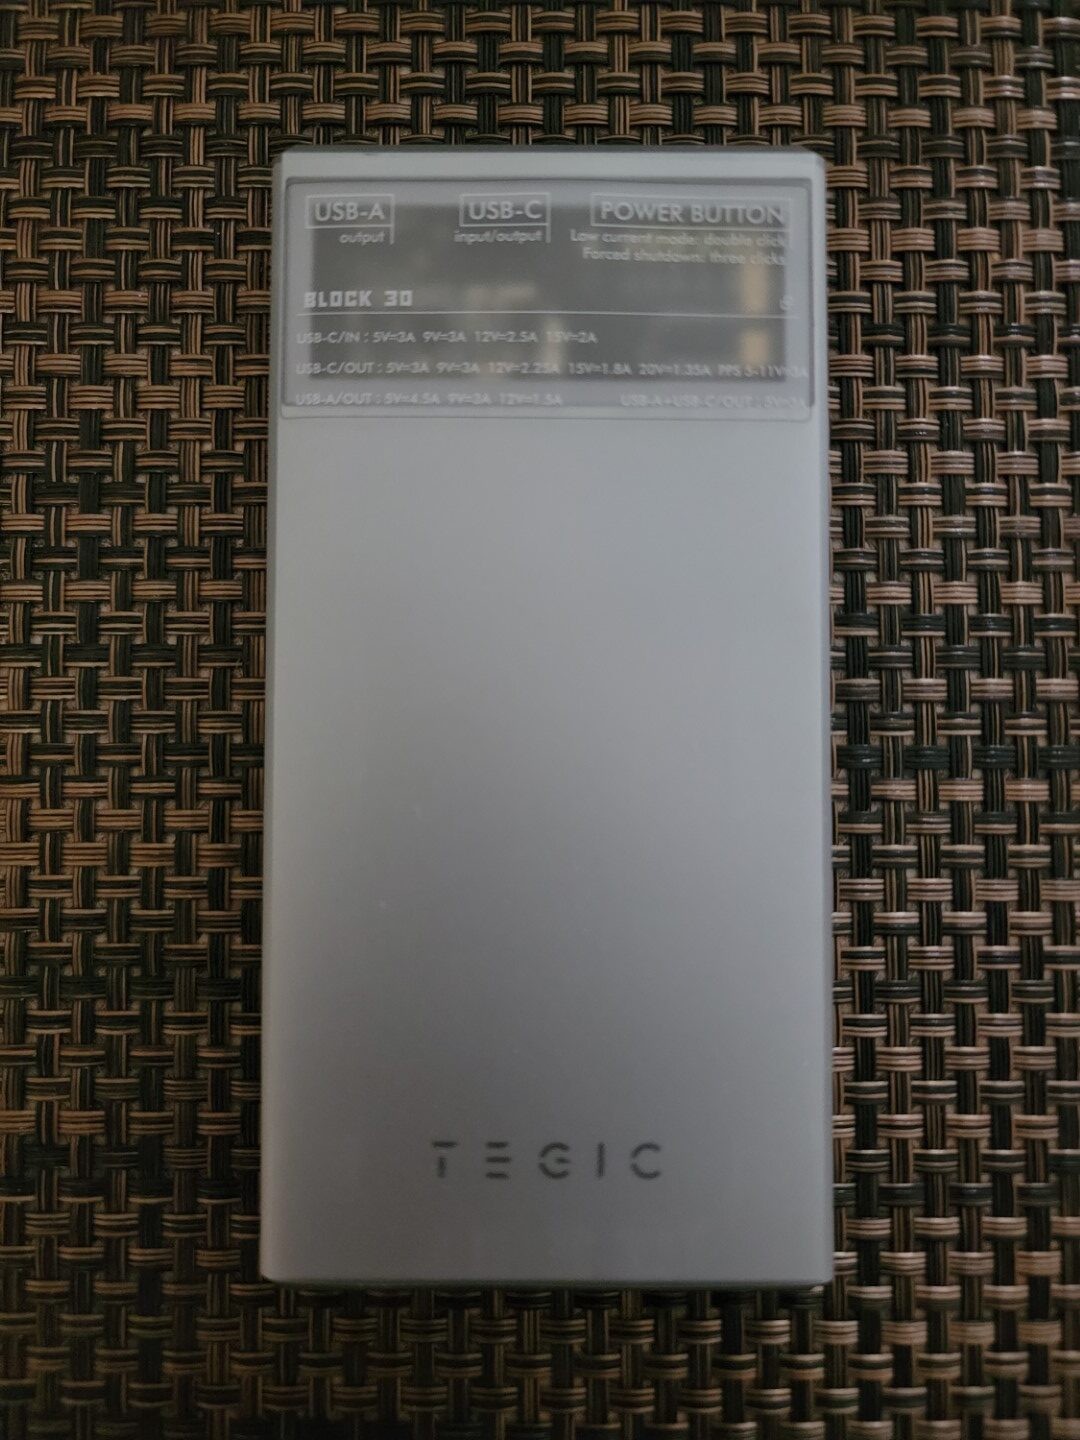 TEGIC Block 30 With protected paper- Front